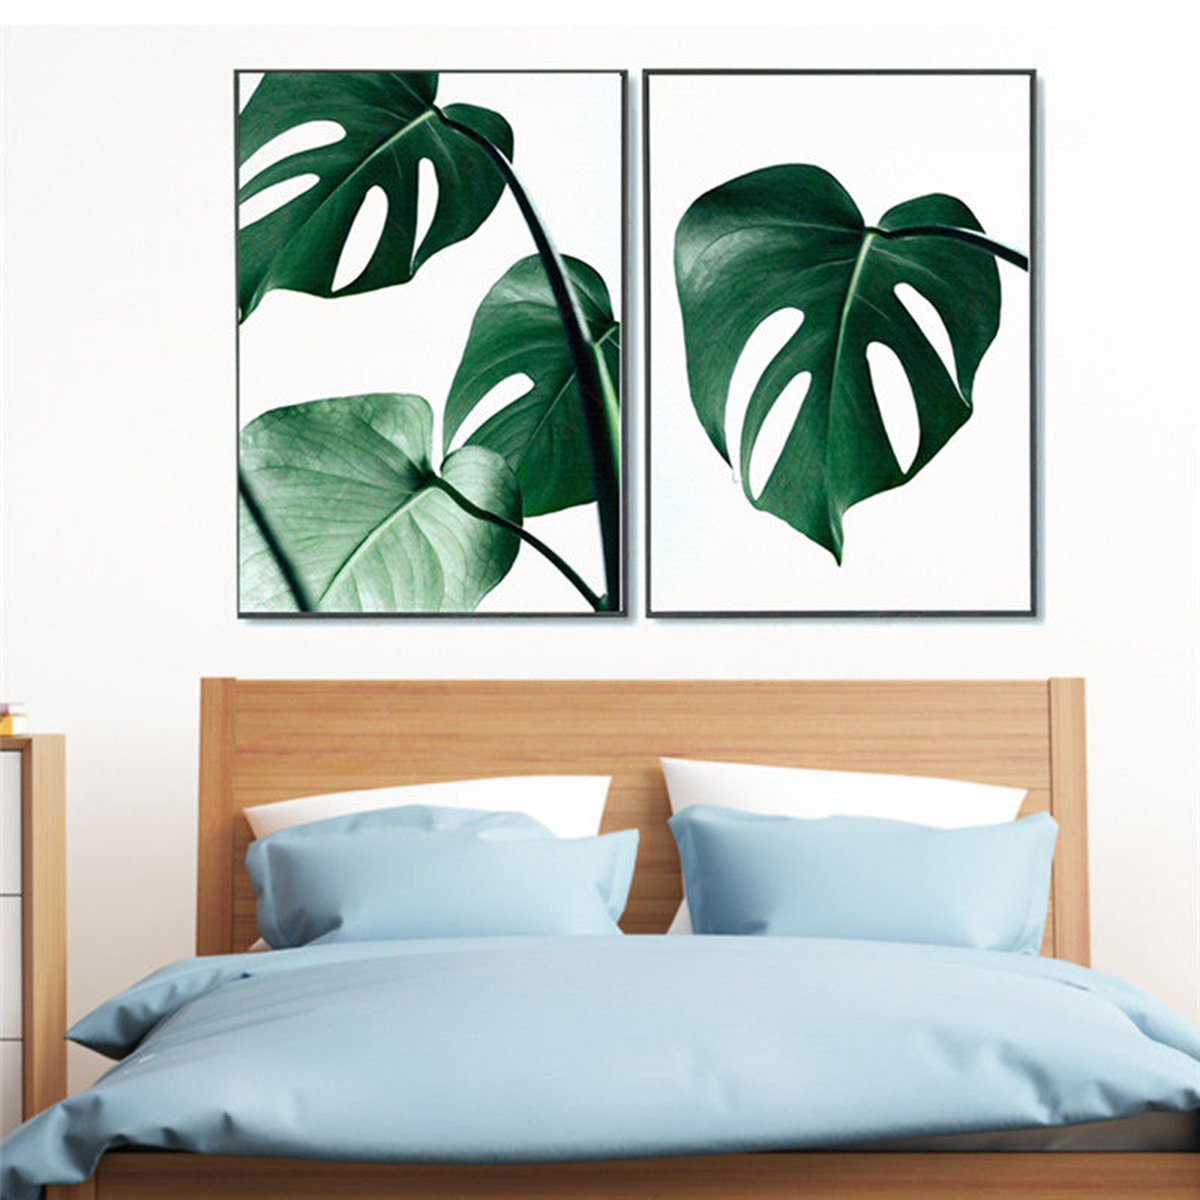 1 Piece Canvas Print Painting Nordic Green Plant Leaf Canvas Art Poster Print Wall Picture Home Decor No Frame—2